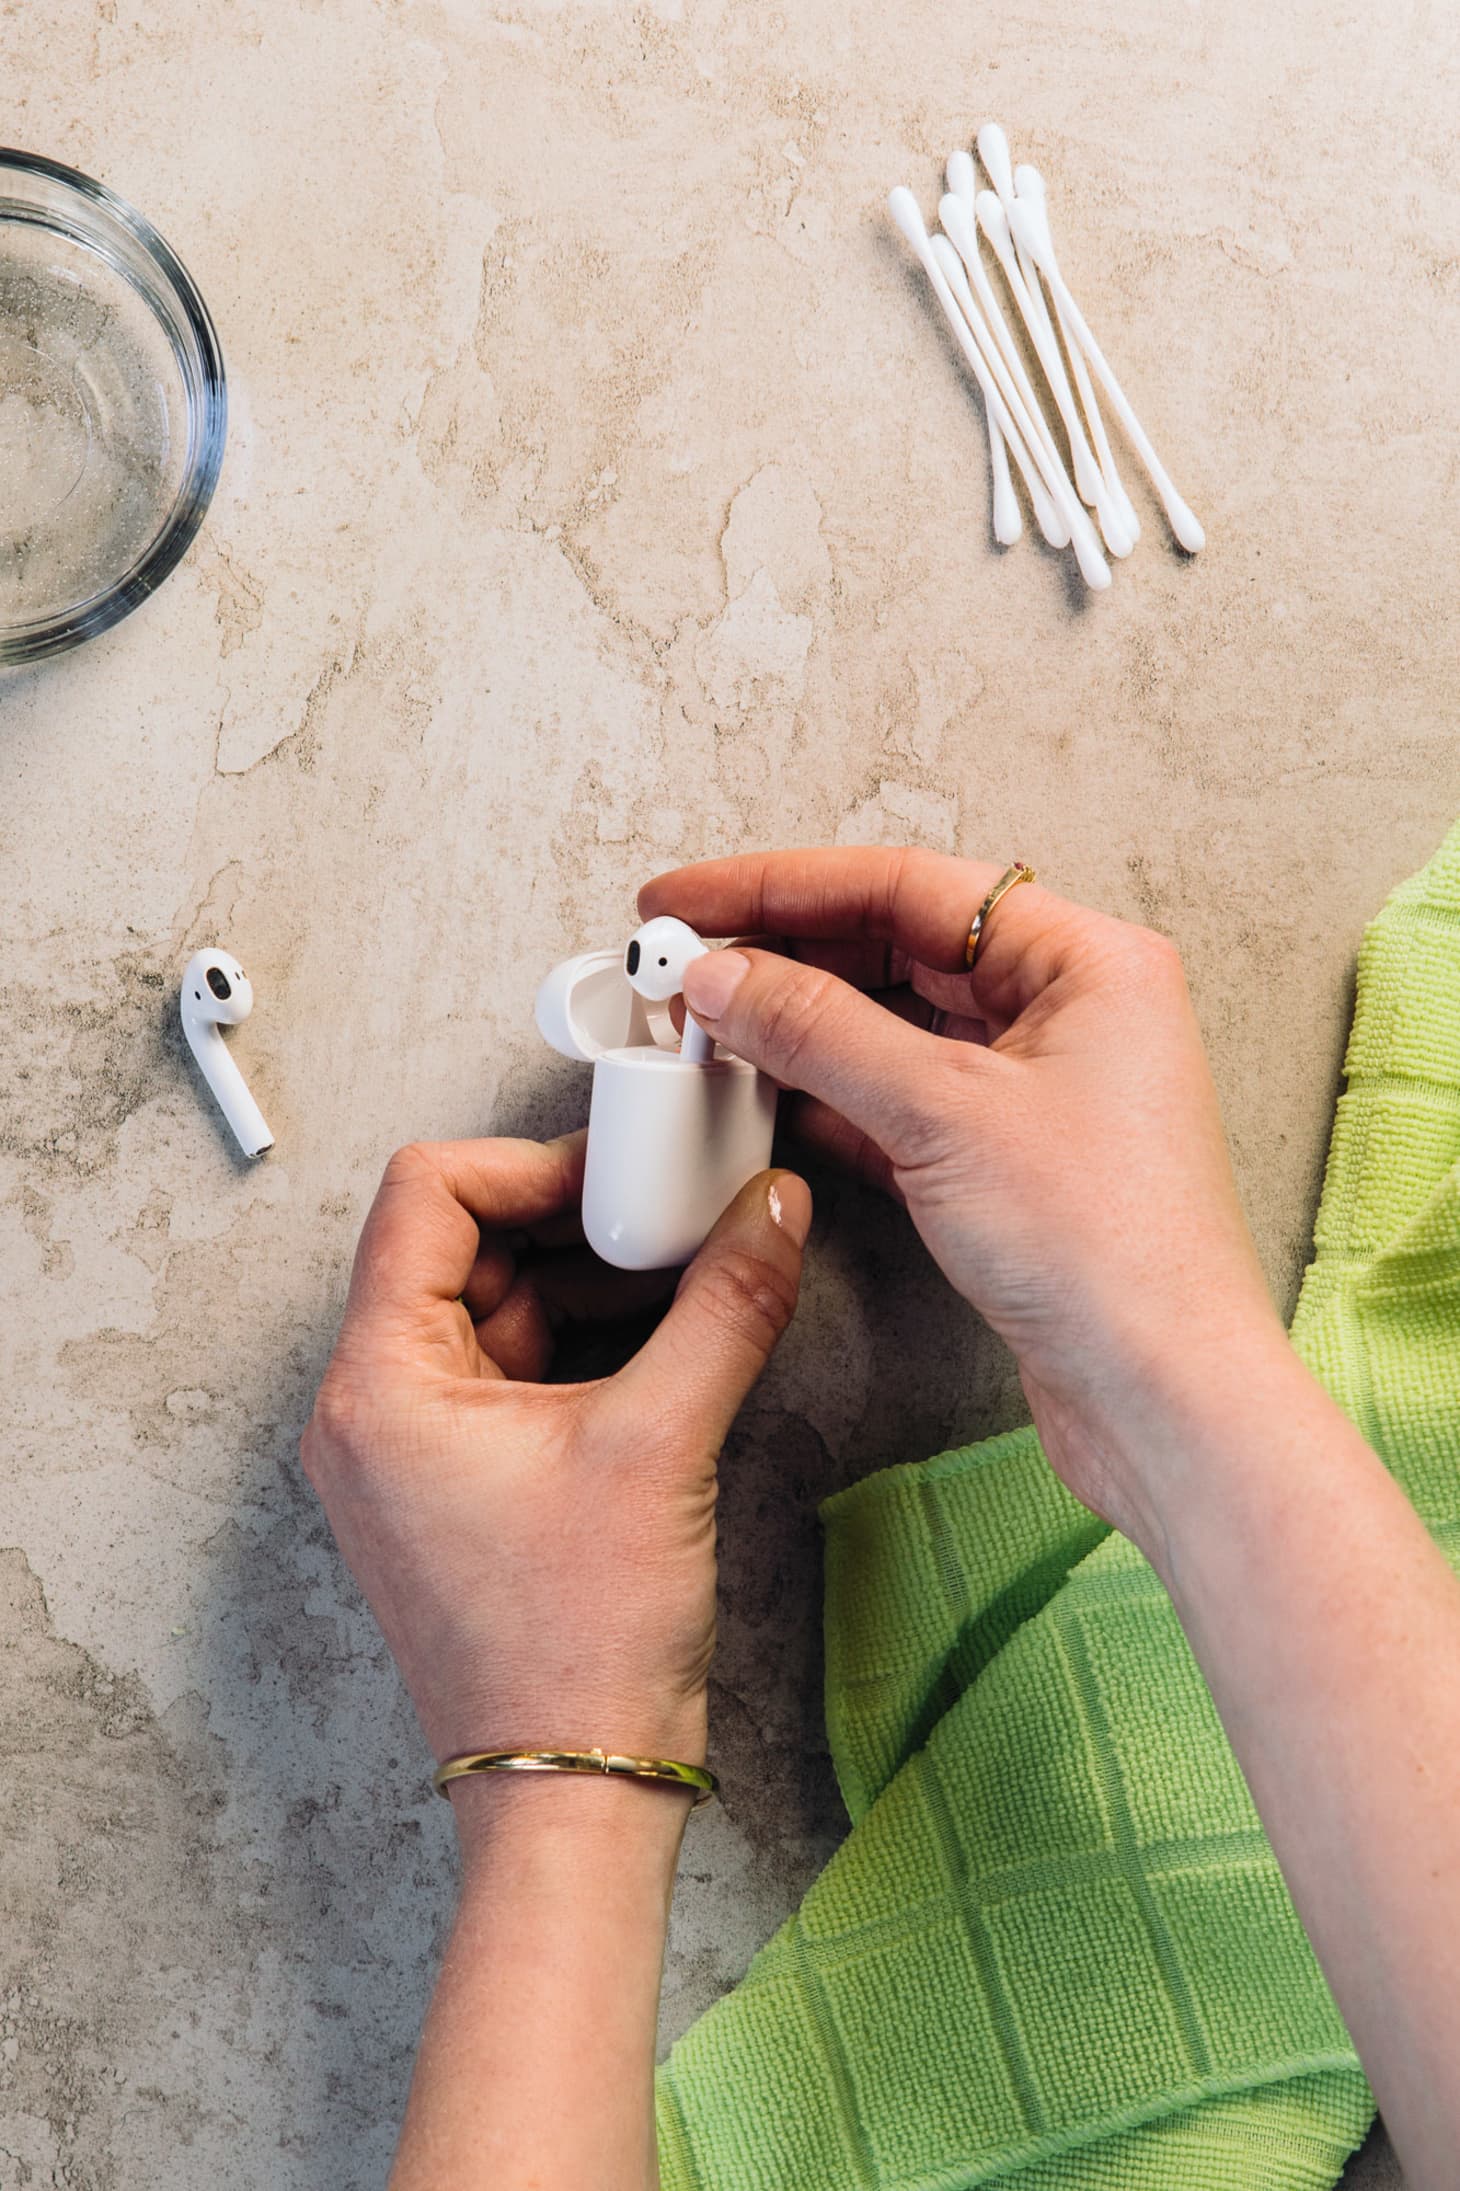 The Best Ways to Clean Apple Airpods and Airpods Pro